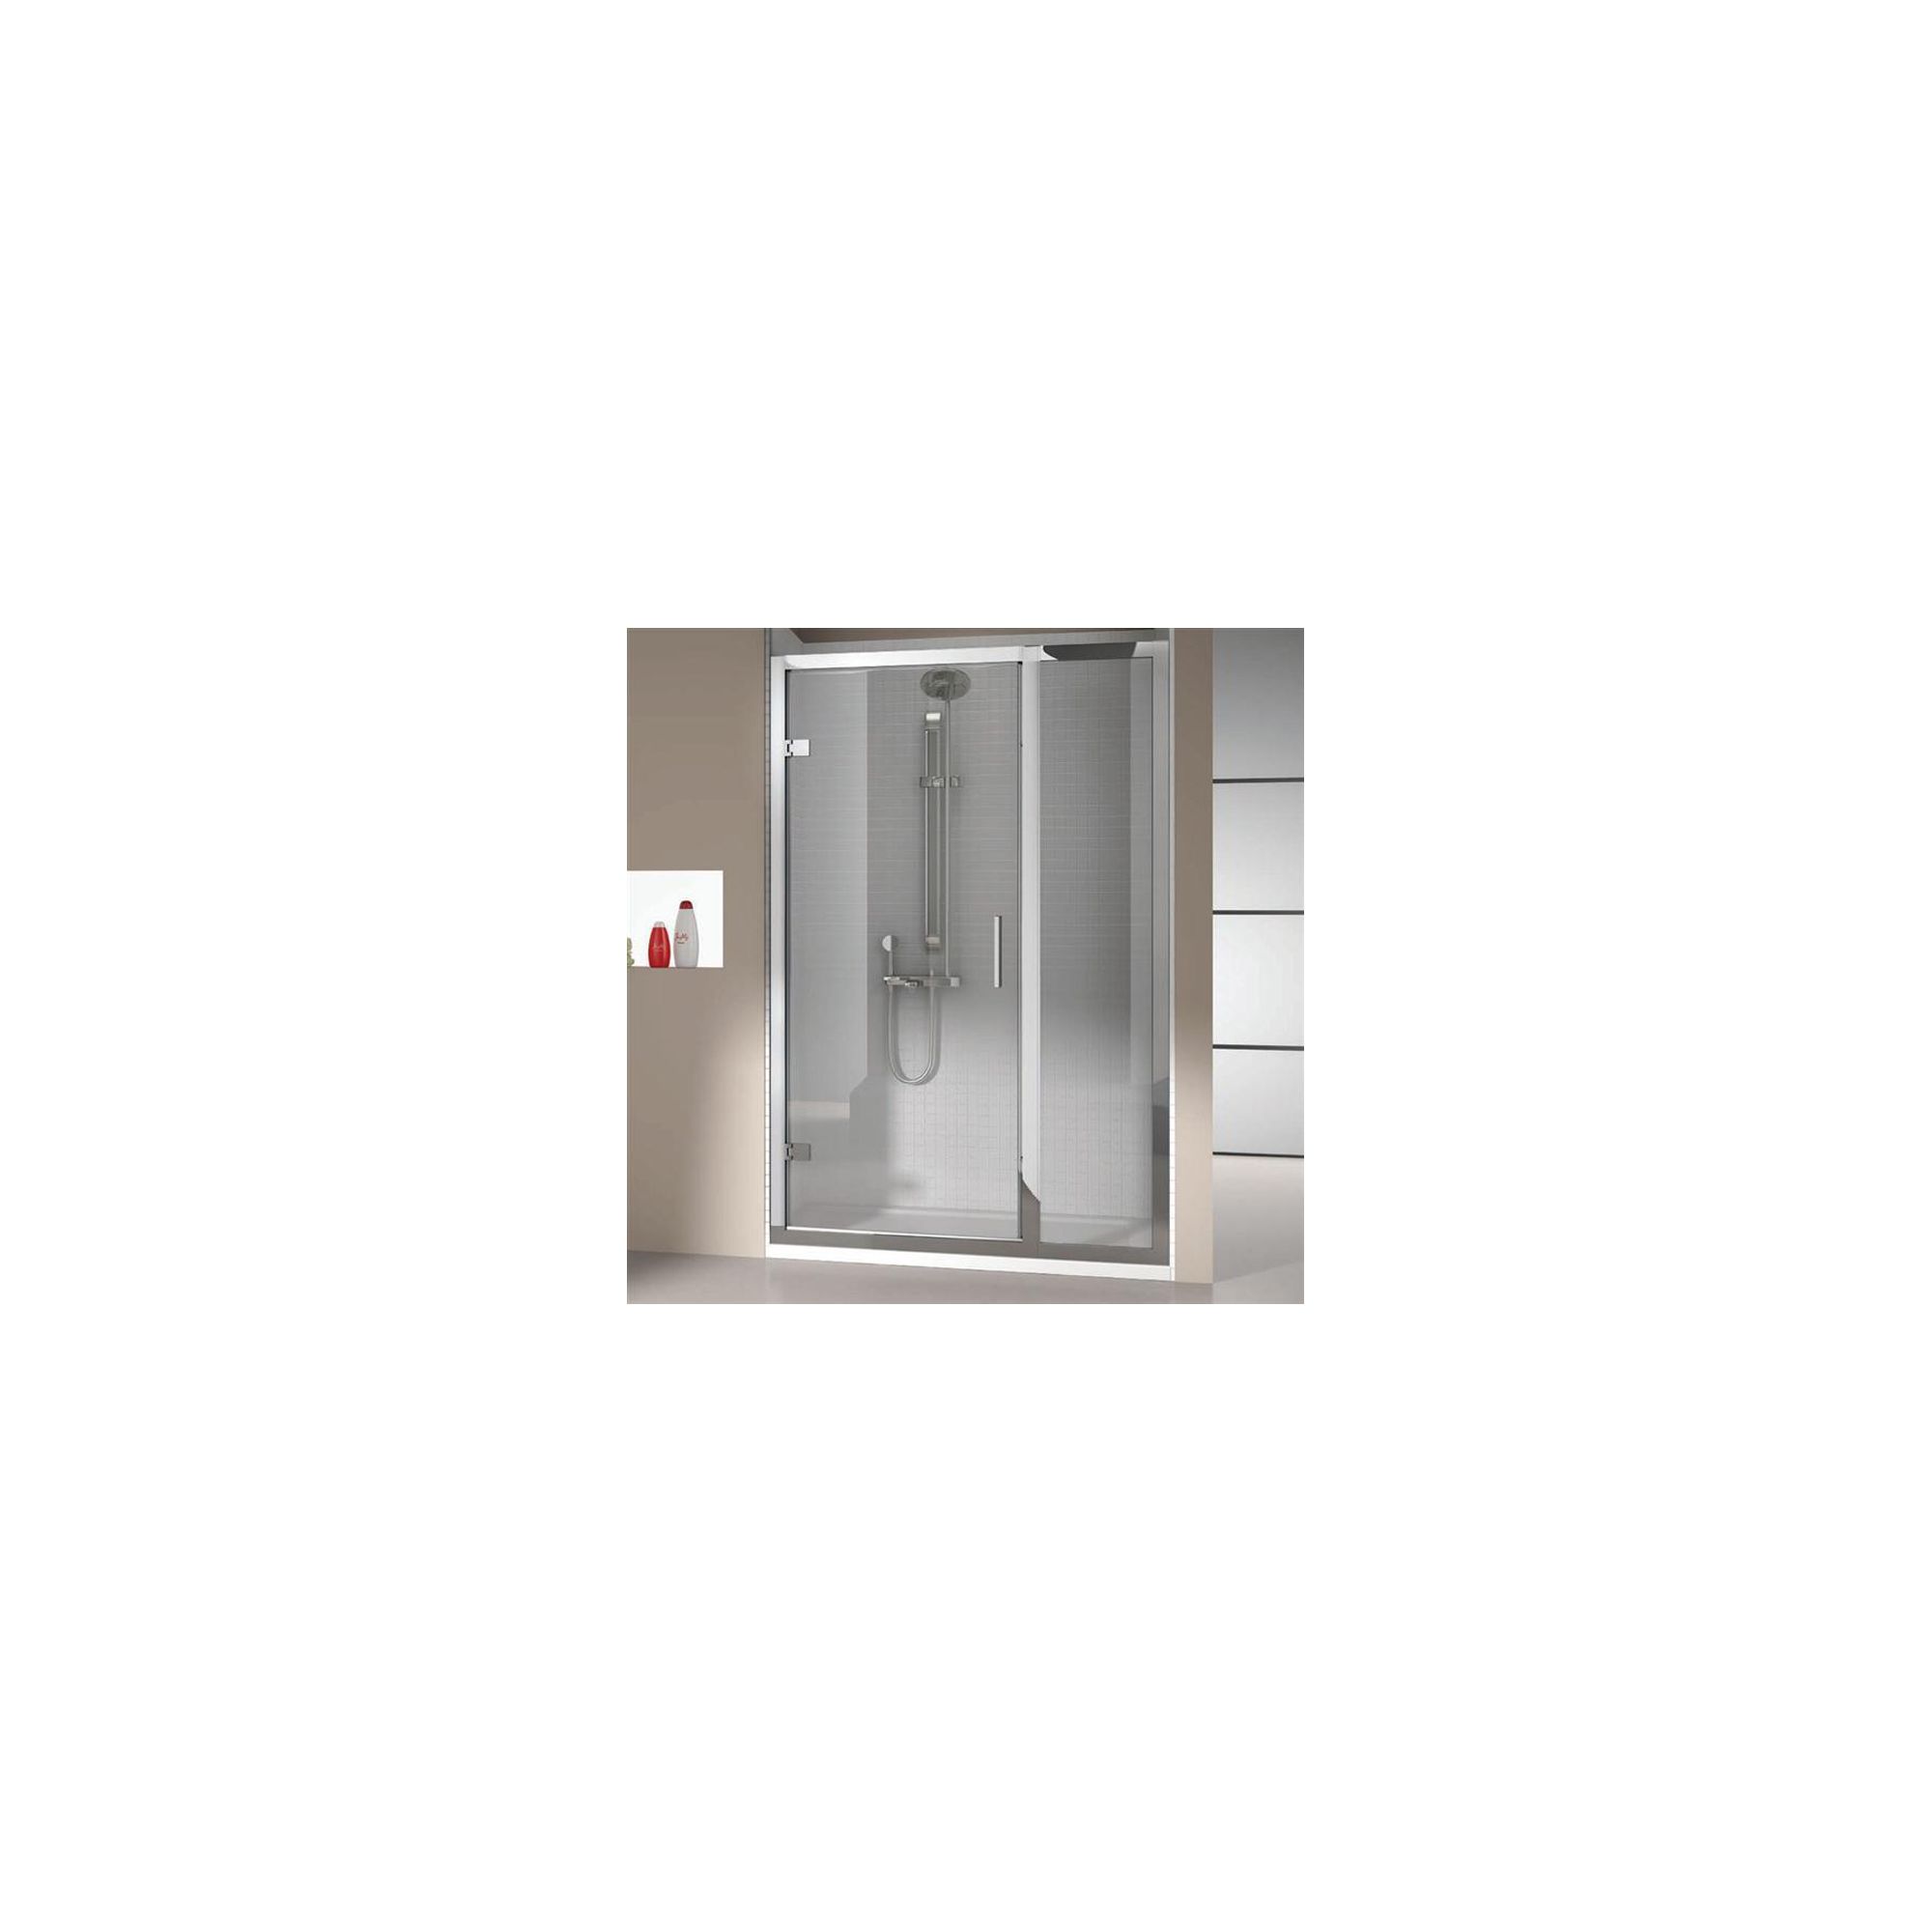 Merlyn Vivid Eight Hinged Shower Door with Inline Panel, 1200mm Wide, 8mm Glass at Tesco Direct